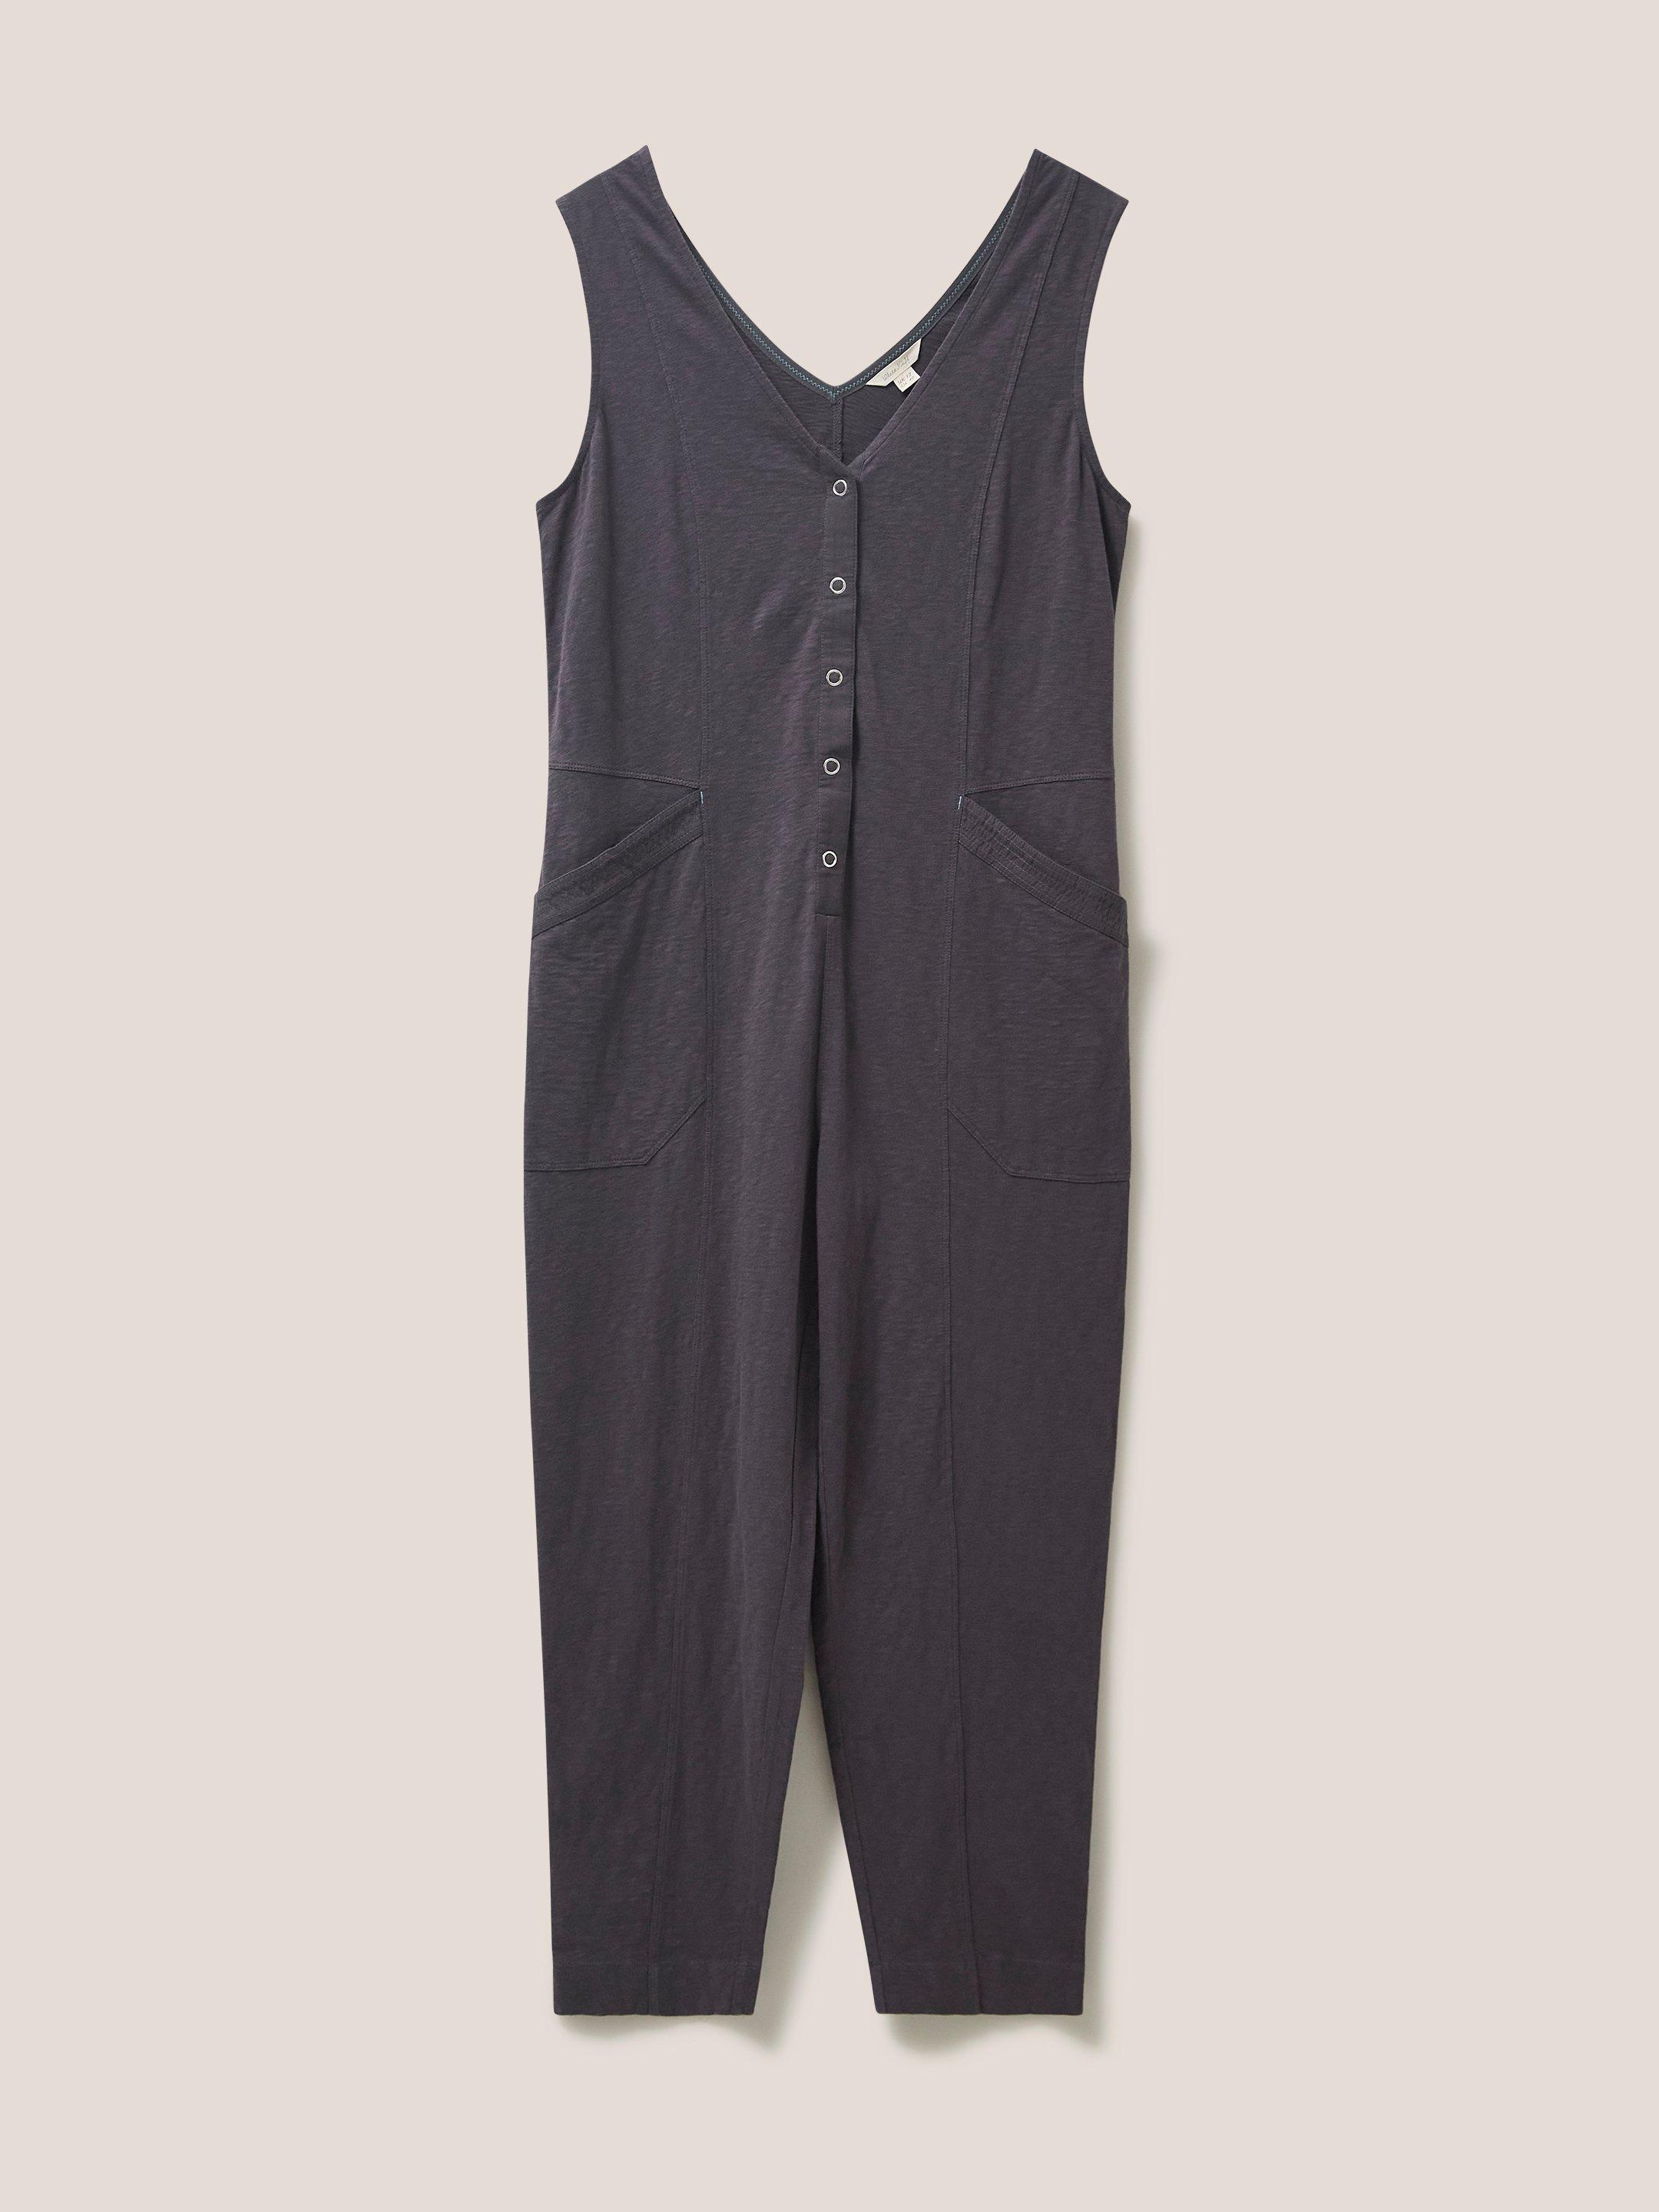 Isla Jersey Jumpsuit in CHARC GREY - FLAT FRONT